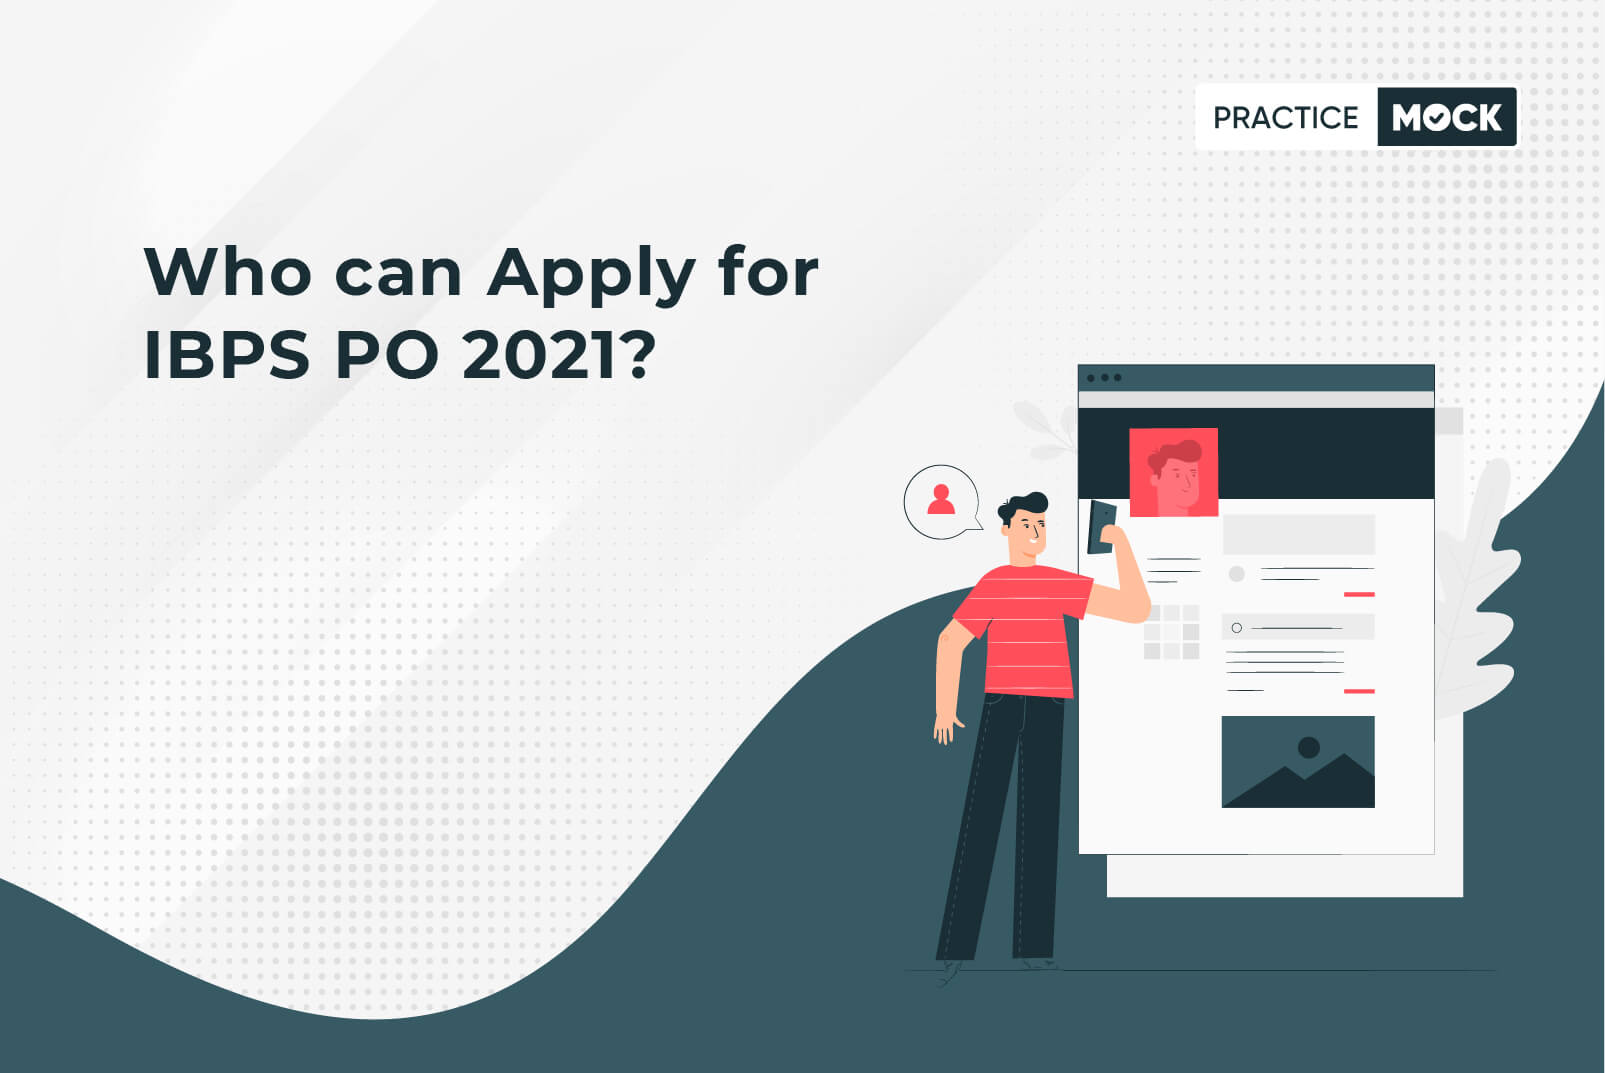 Who can apply for IBPS PO?